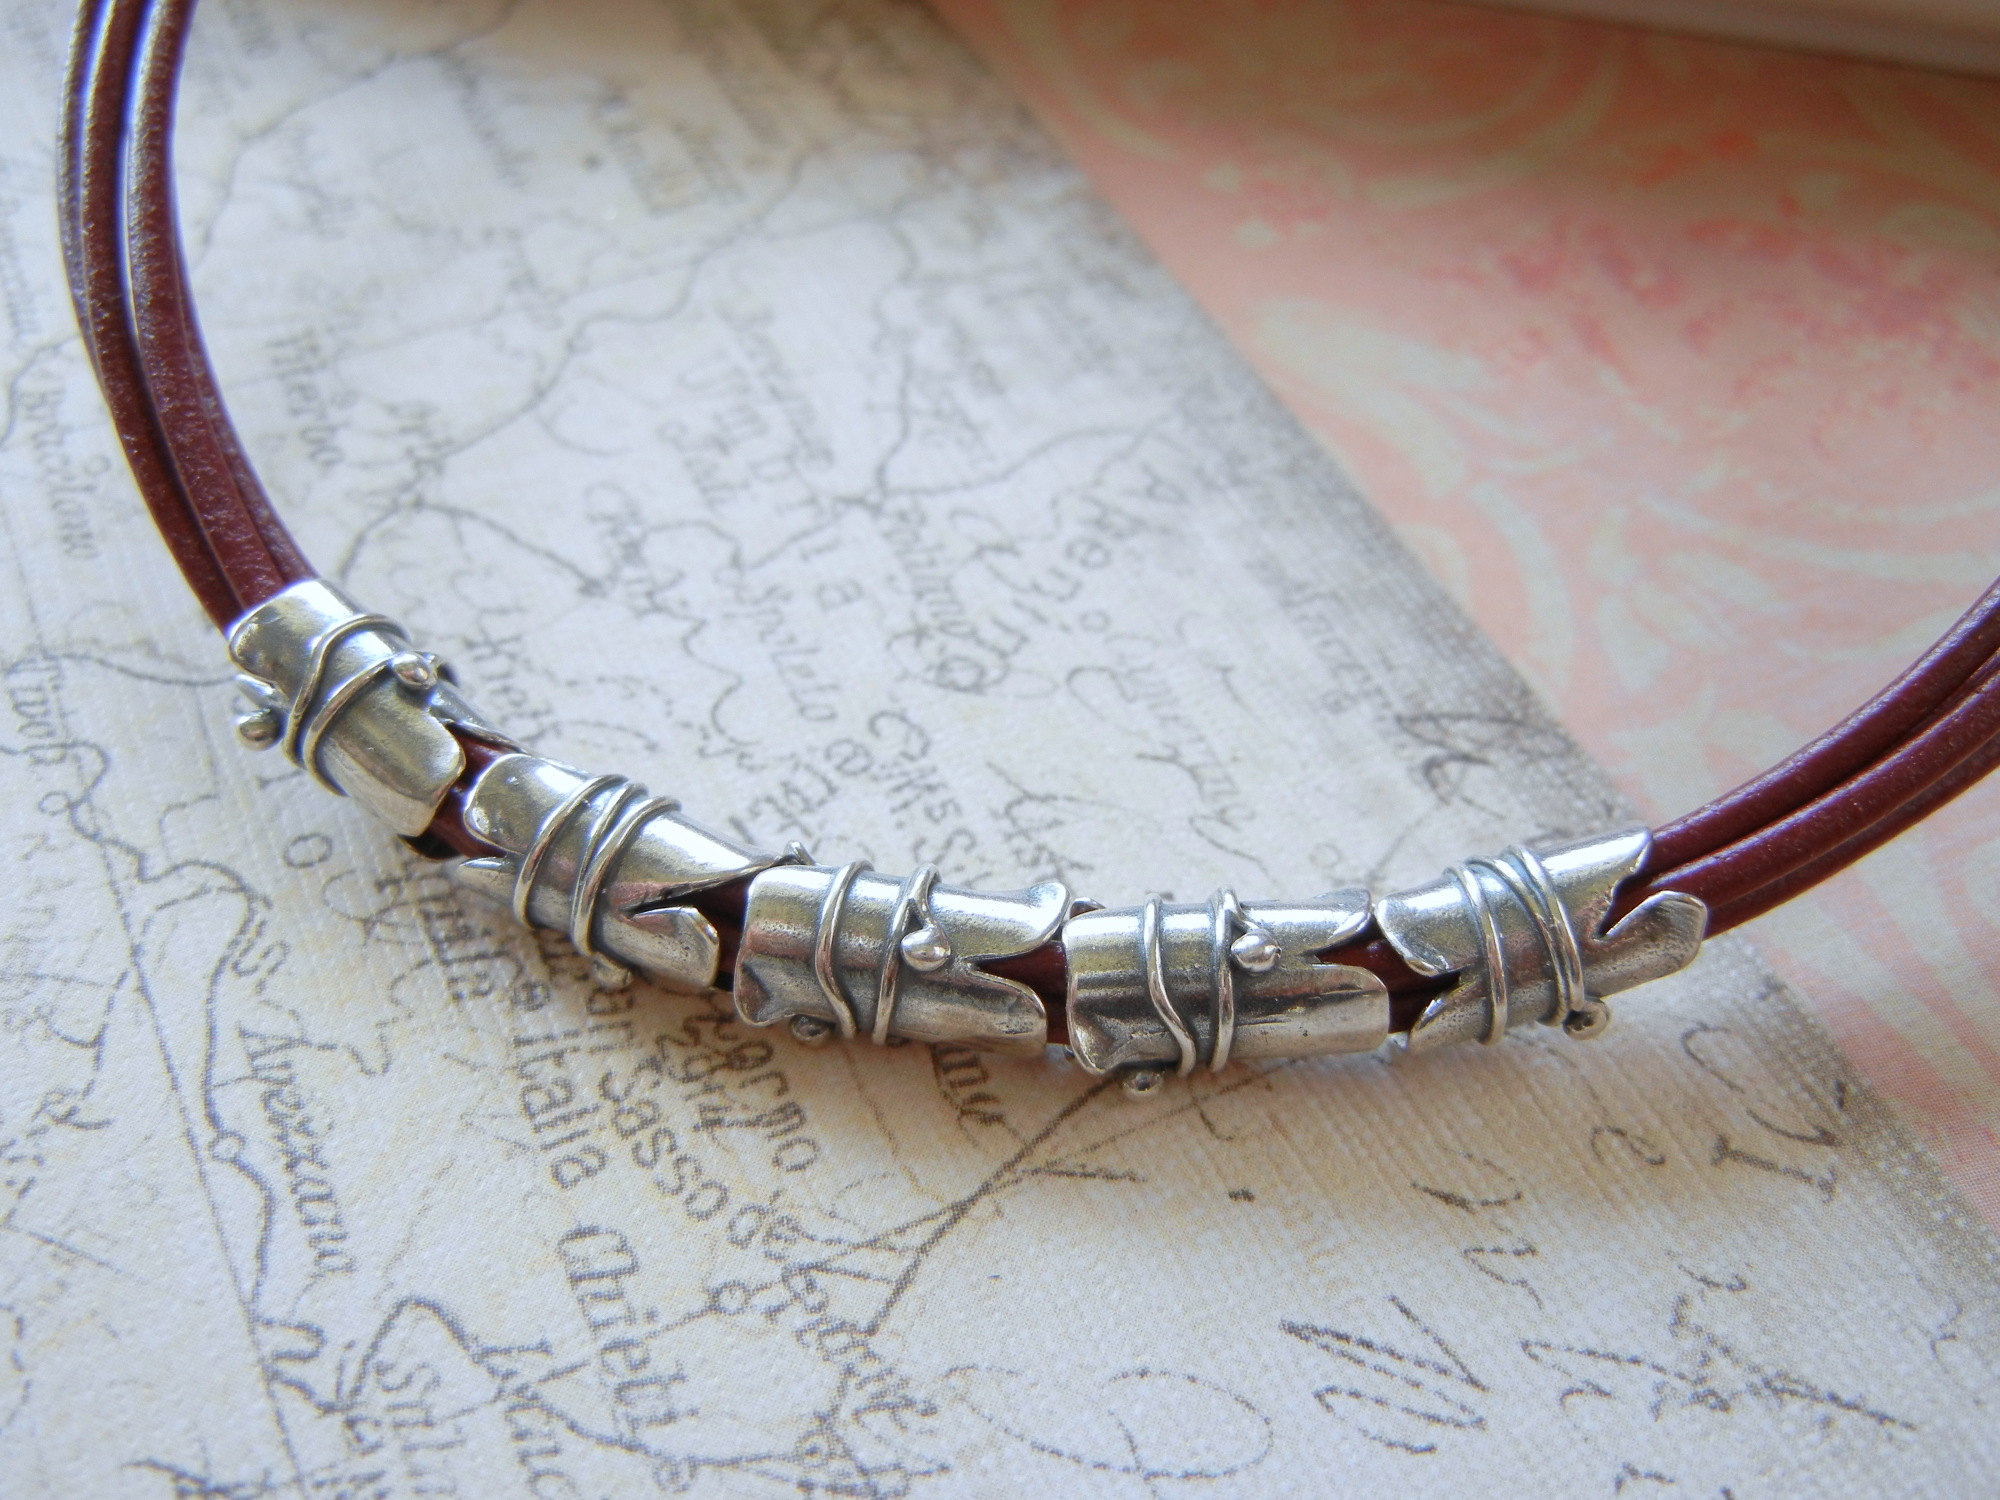 Multi-Strand Chain and Bead Necklace - How Did You Make This?